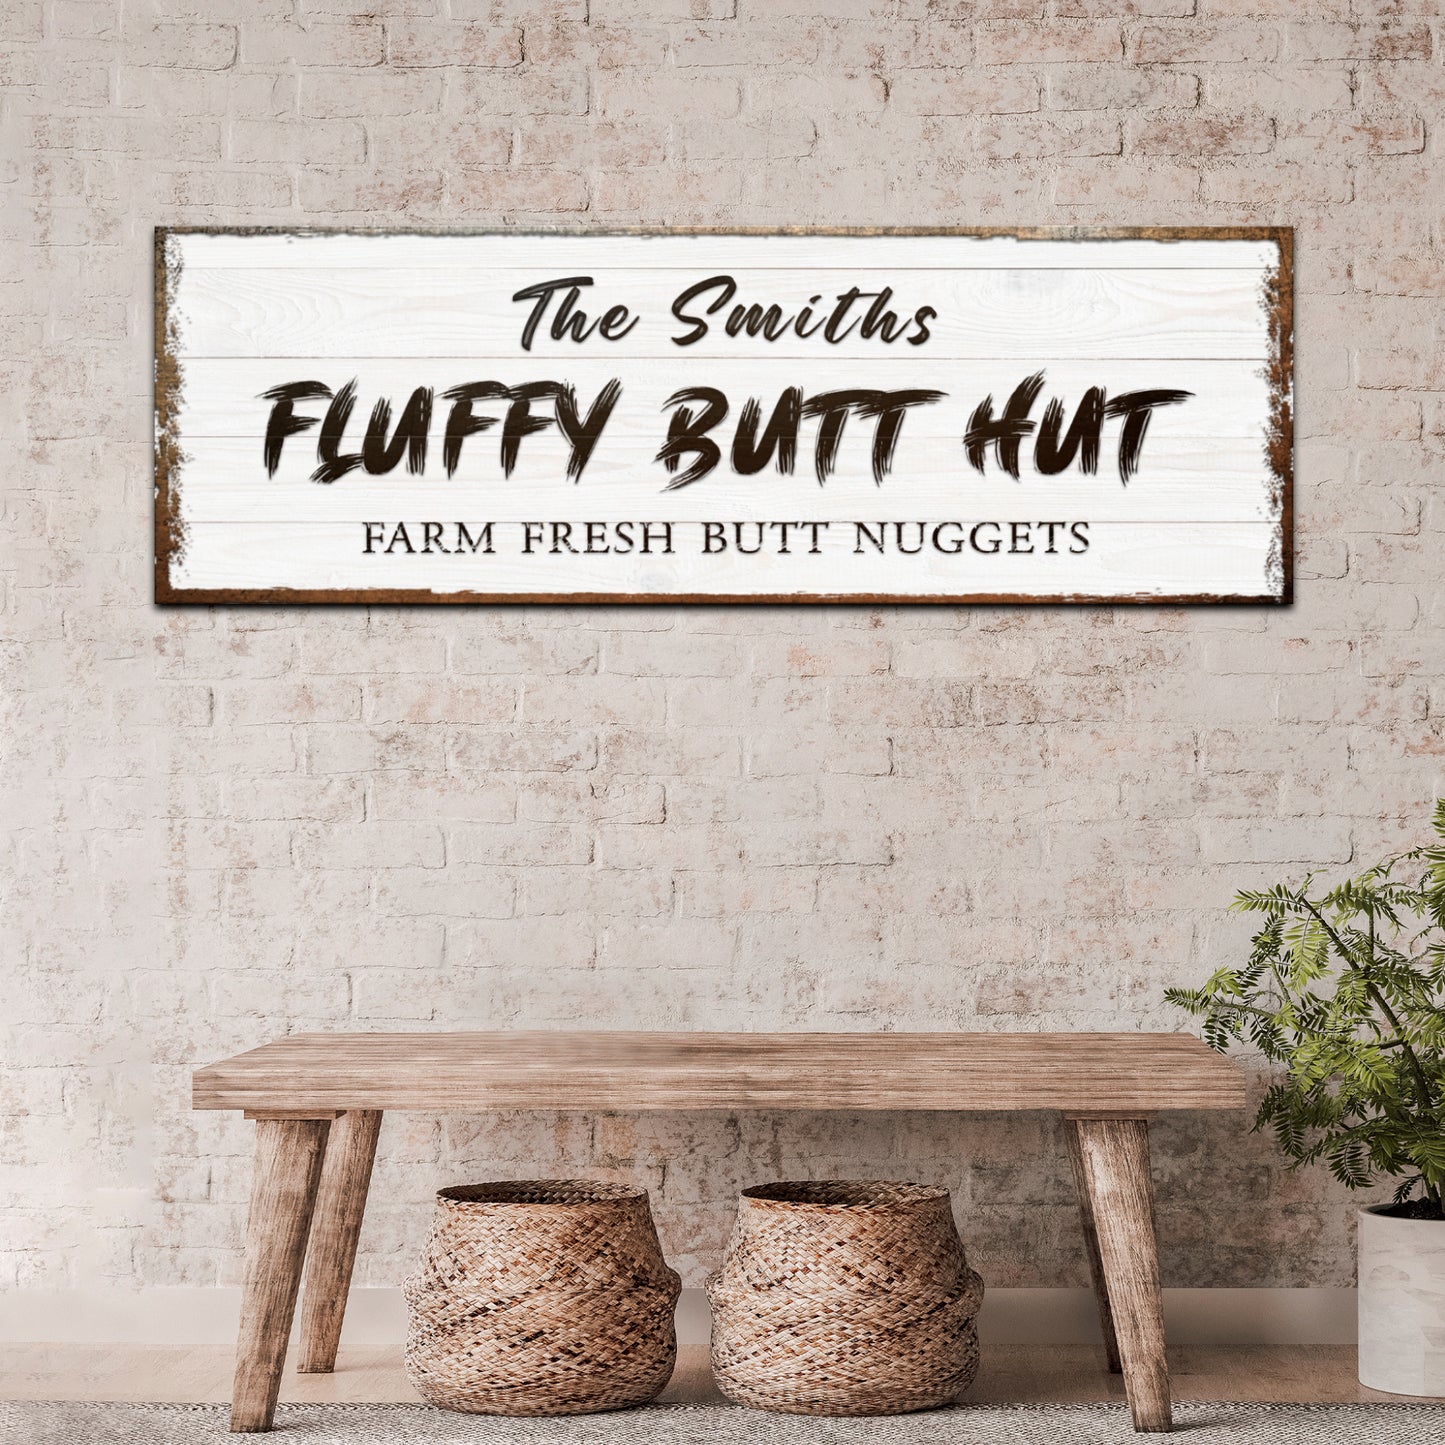 Fluffy Butt Hutt Sign - Image by Tailored Canvases